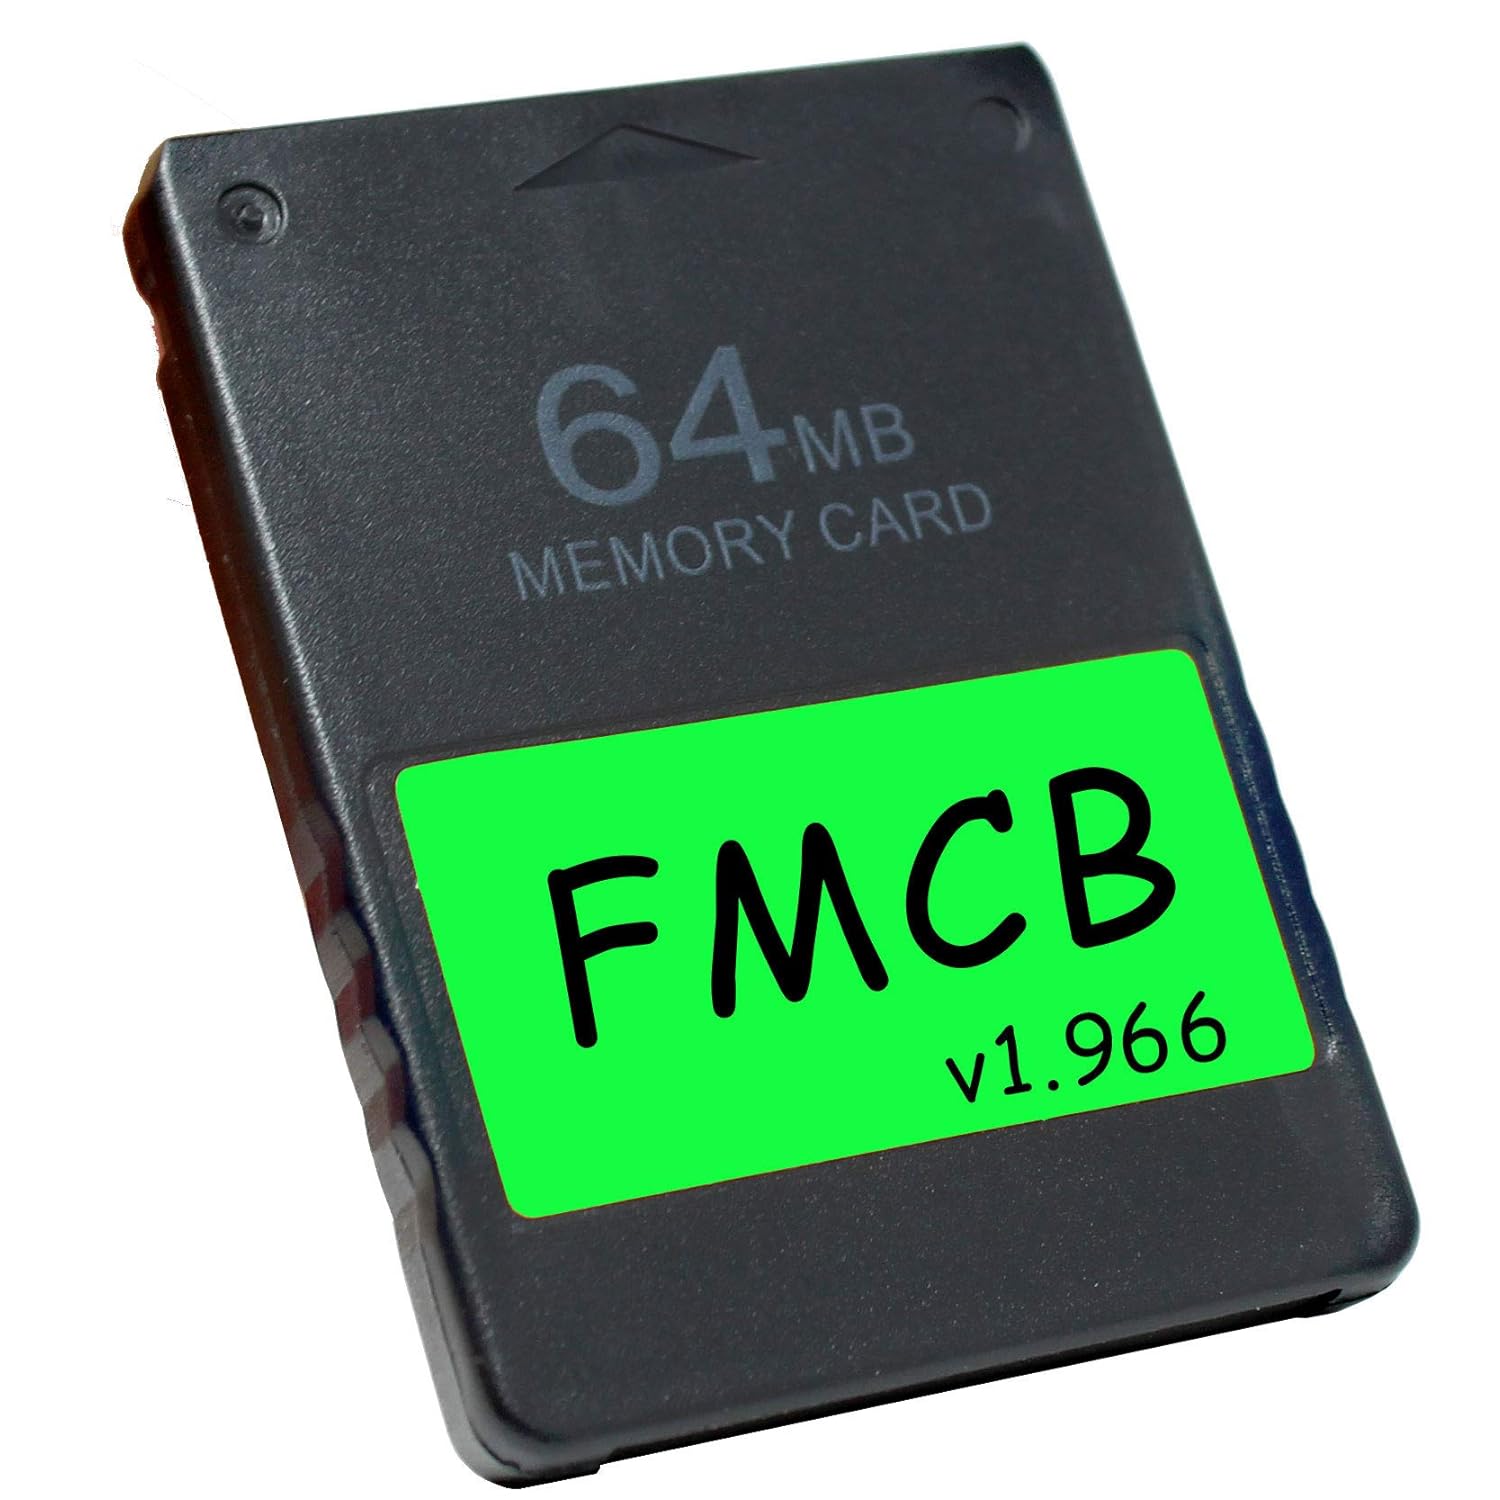 Great Choice Products Fmcb Free Mcboot Ps2 Memory Card V.1 966-64 Mb Memory Card For Ps2 Playstation 2 Games In Usb Hard Drive Or Hard Disk…